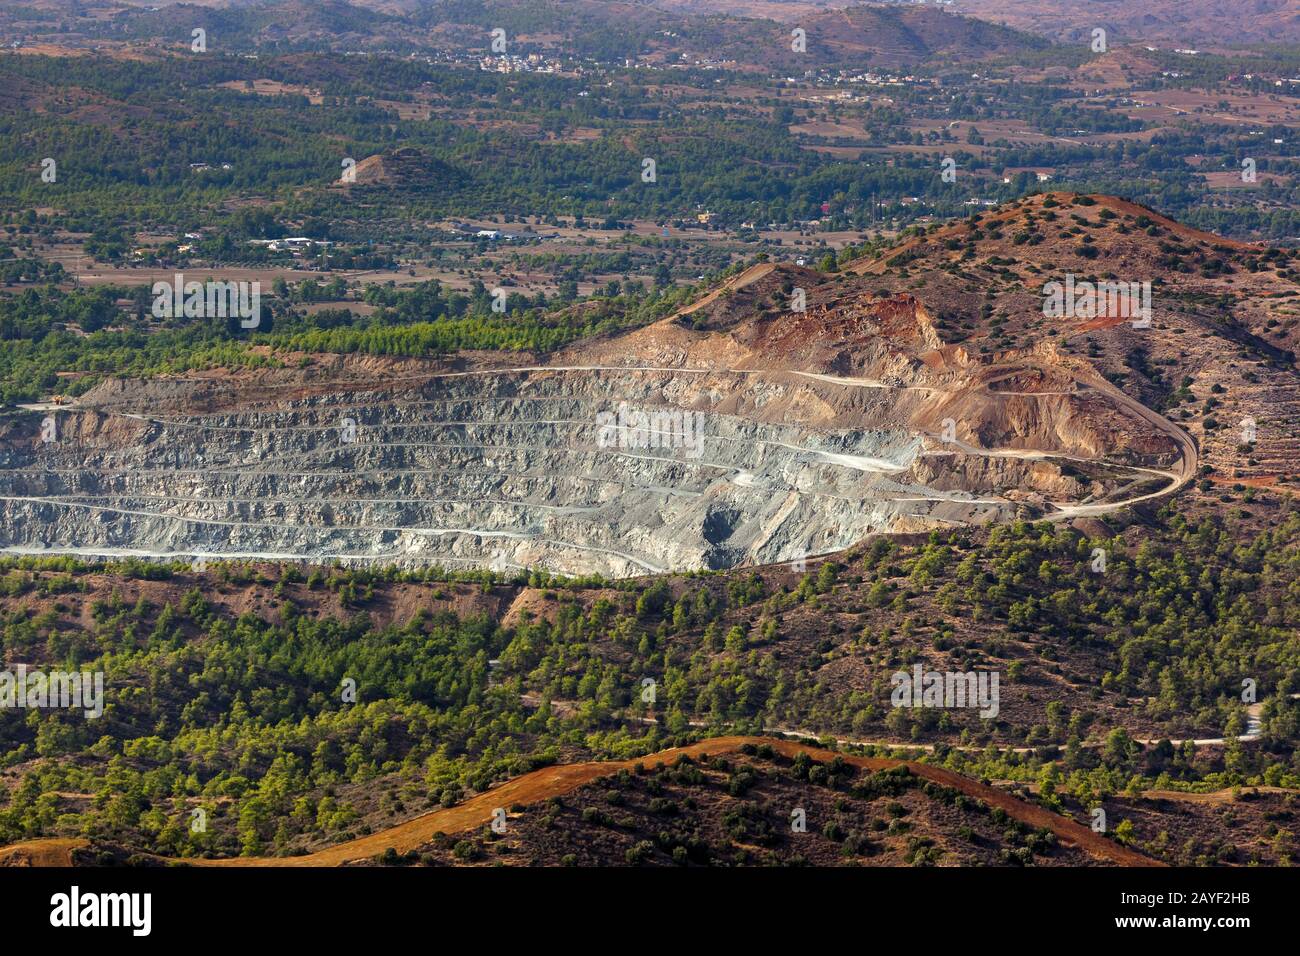 Large quarry for mining with many horizons and ledges in Cyprus Stock Photo